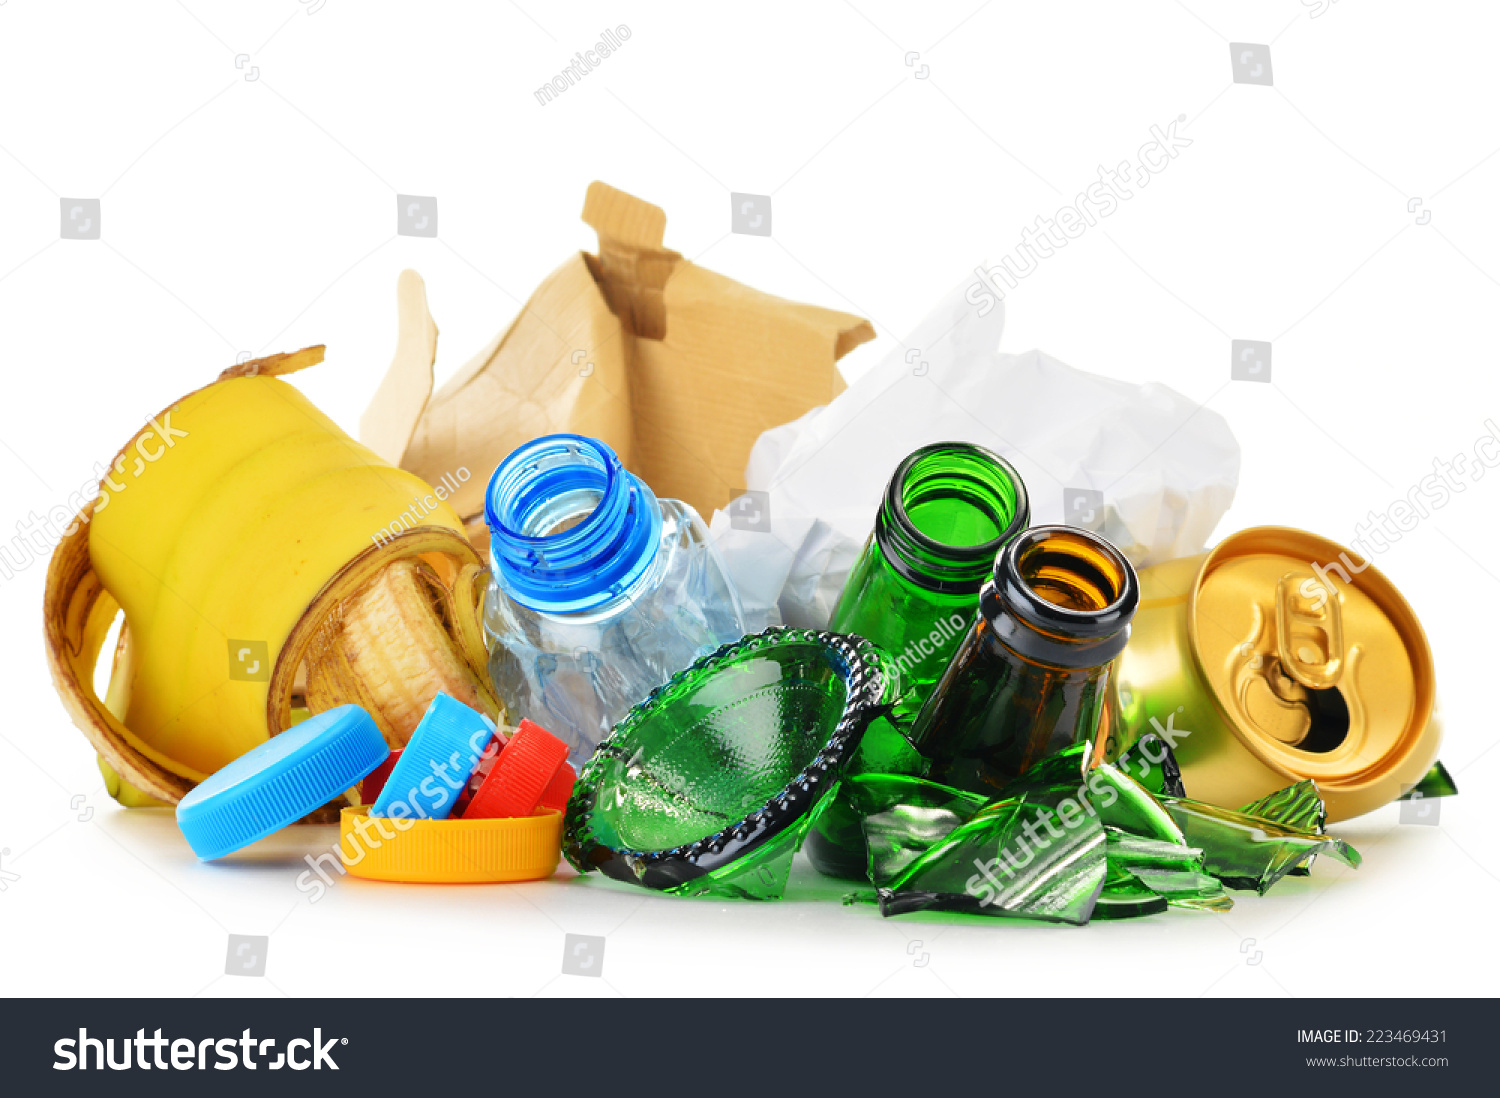 Composition With Recyclable Garbage Consisting Of Glass, Plastic, Metal